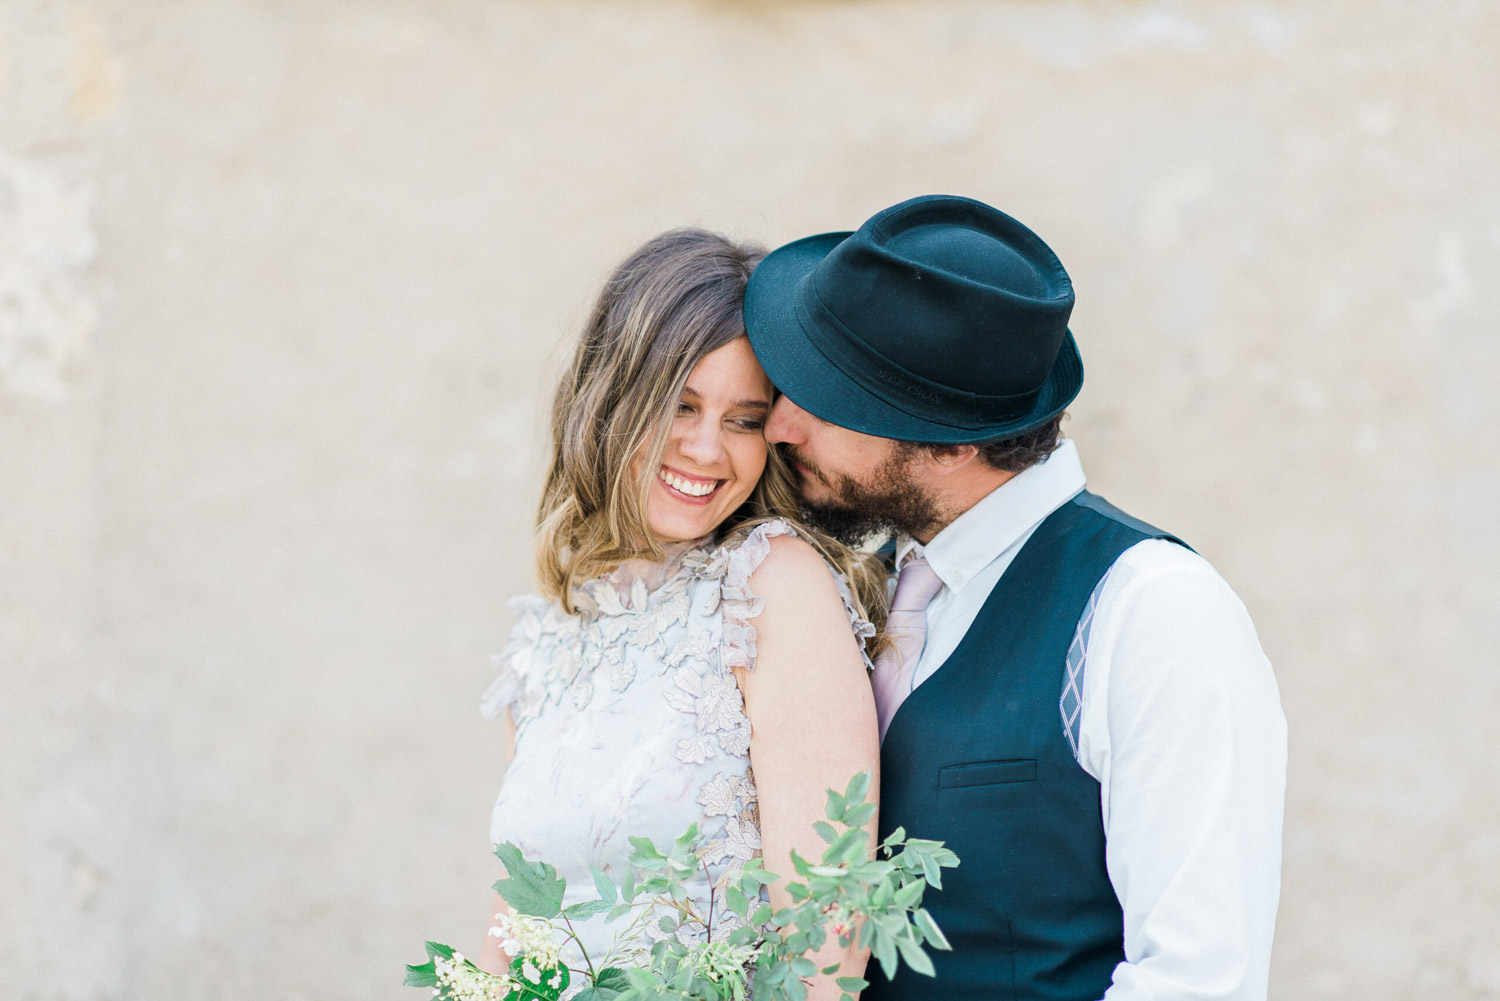 Fine Art Destination Wedding Photographer in Europe by Nicole Mihelic | Wedding Photographer France and Italy